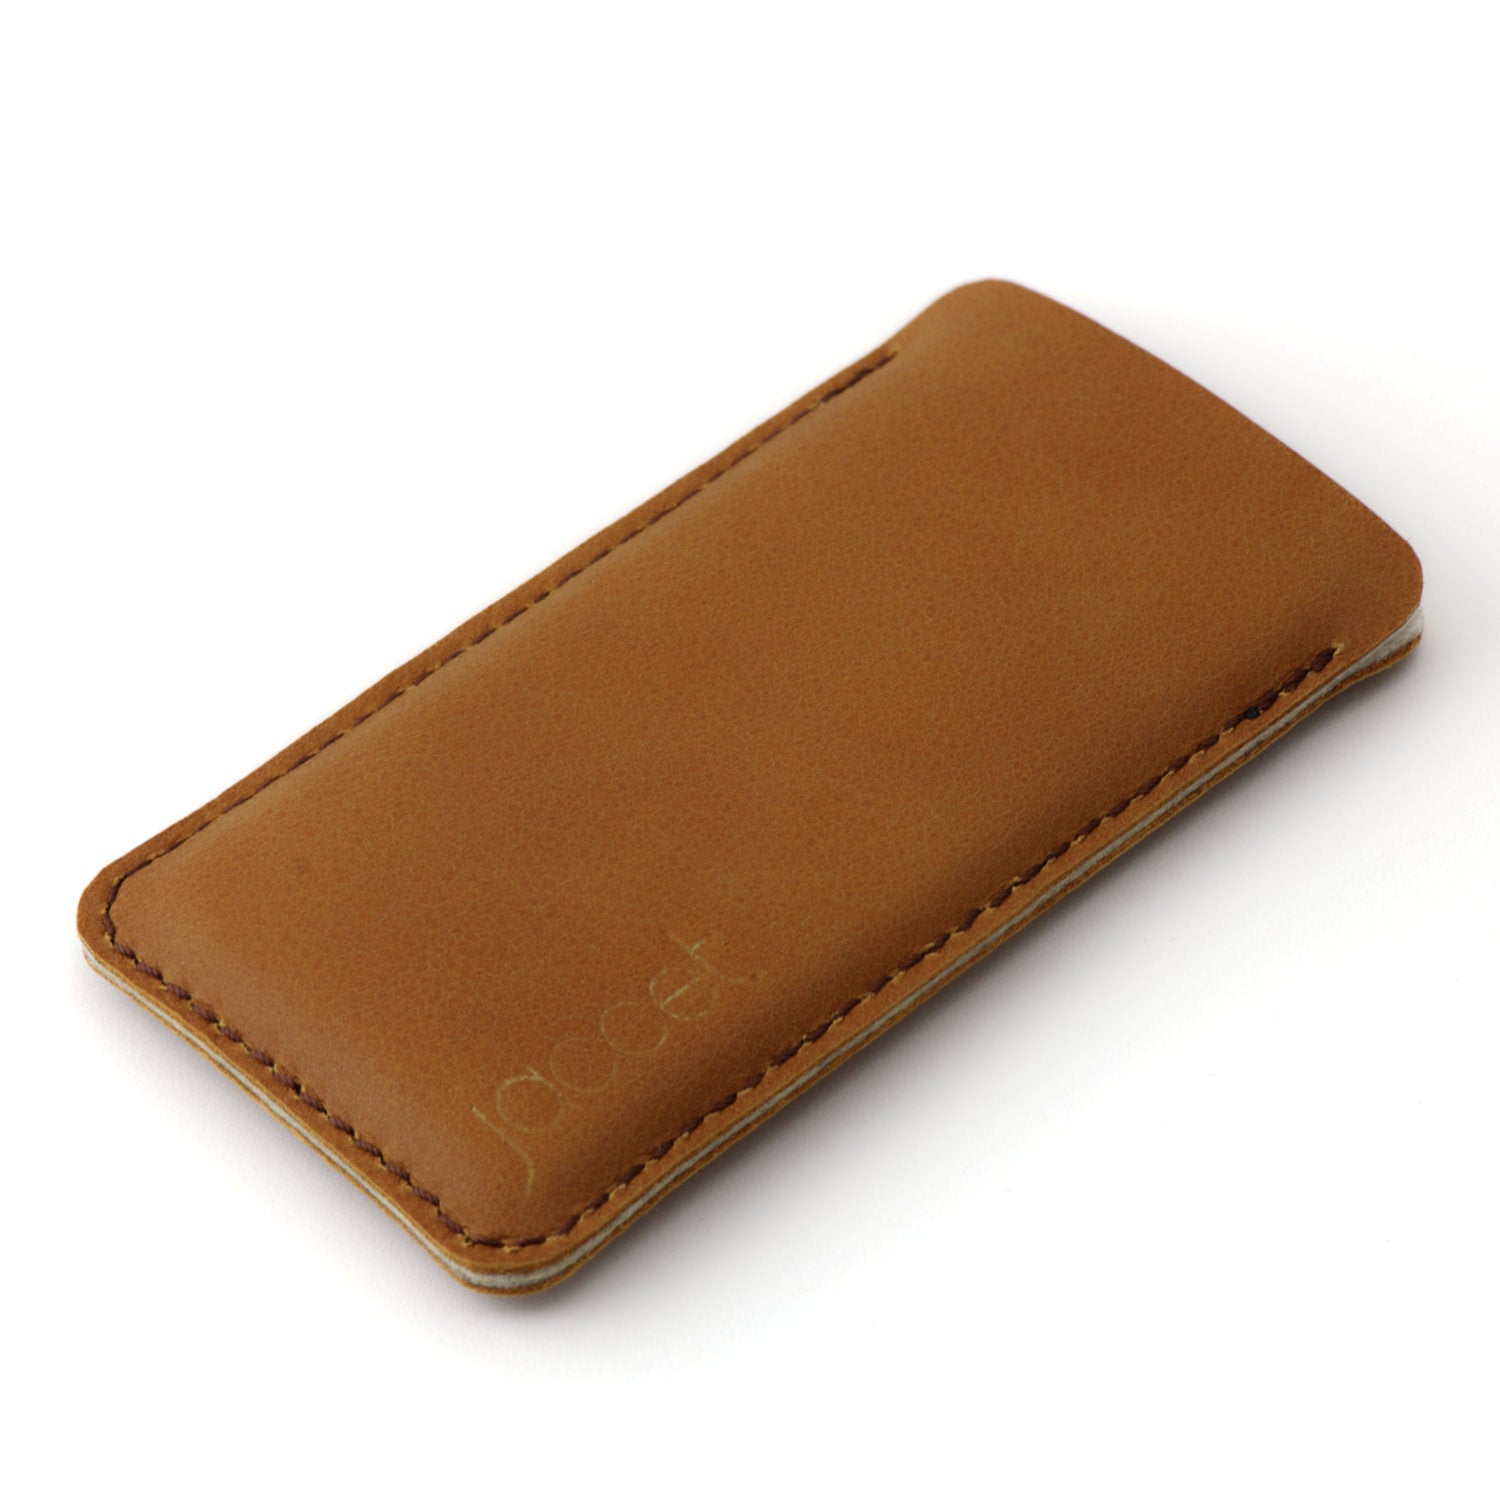 JACCET leather Samsung Galaxy sleeve - Cognac color leather with brown wool felt - 100% Handmade